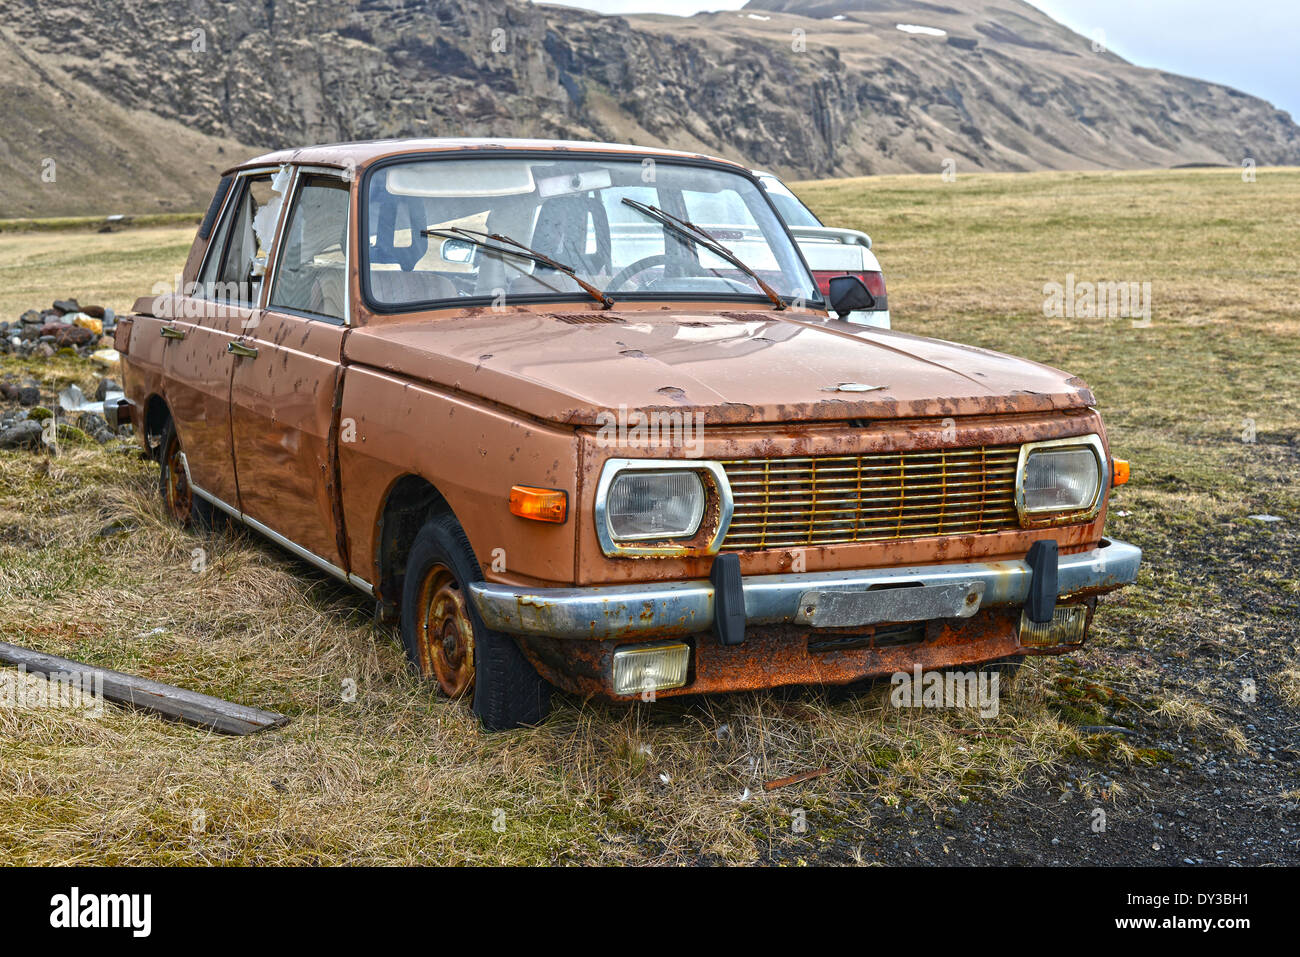 Abandoned rusty car in the Icelandic countryside Stock Photo